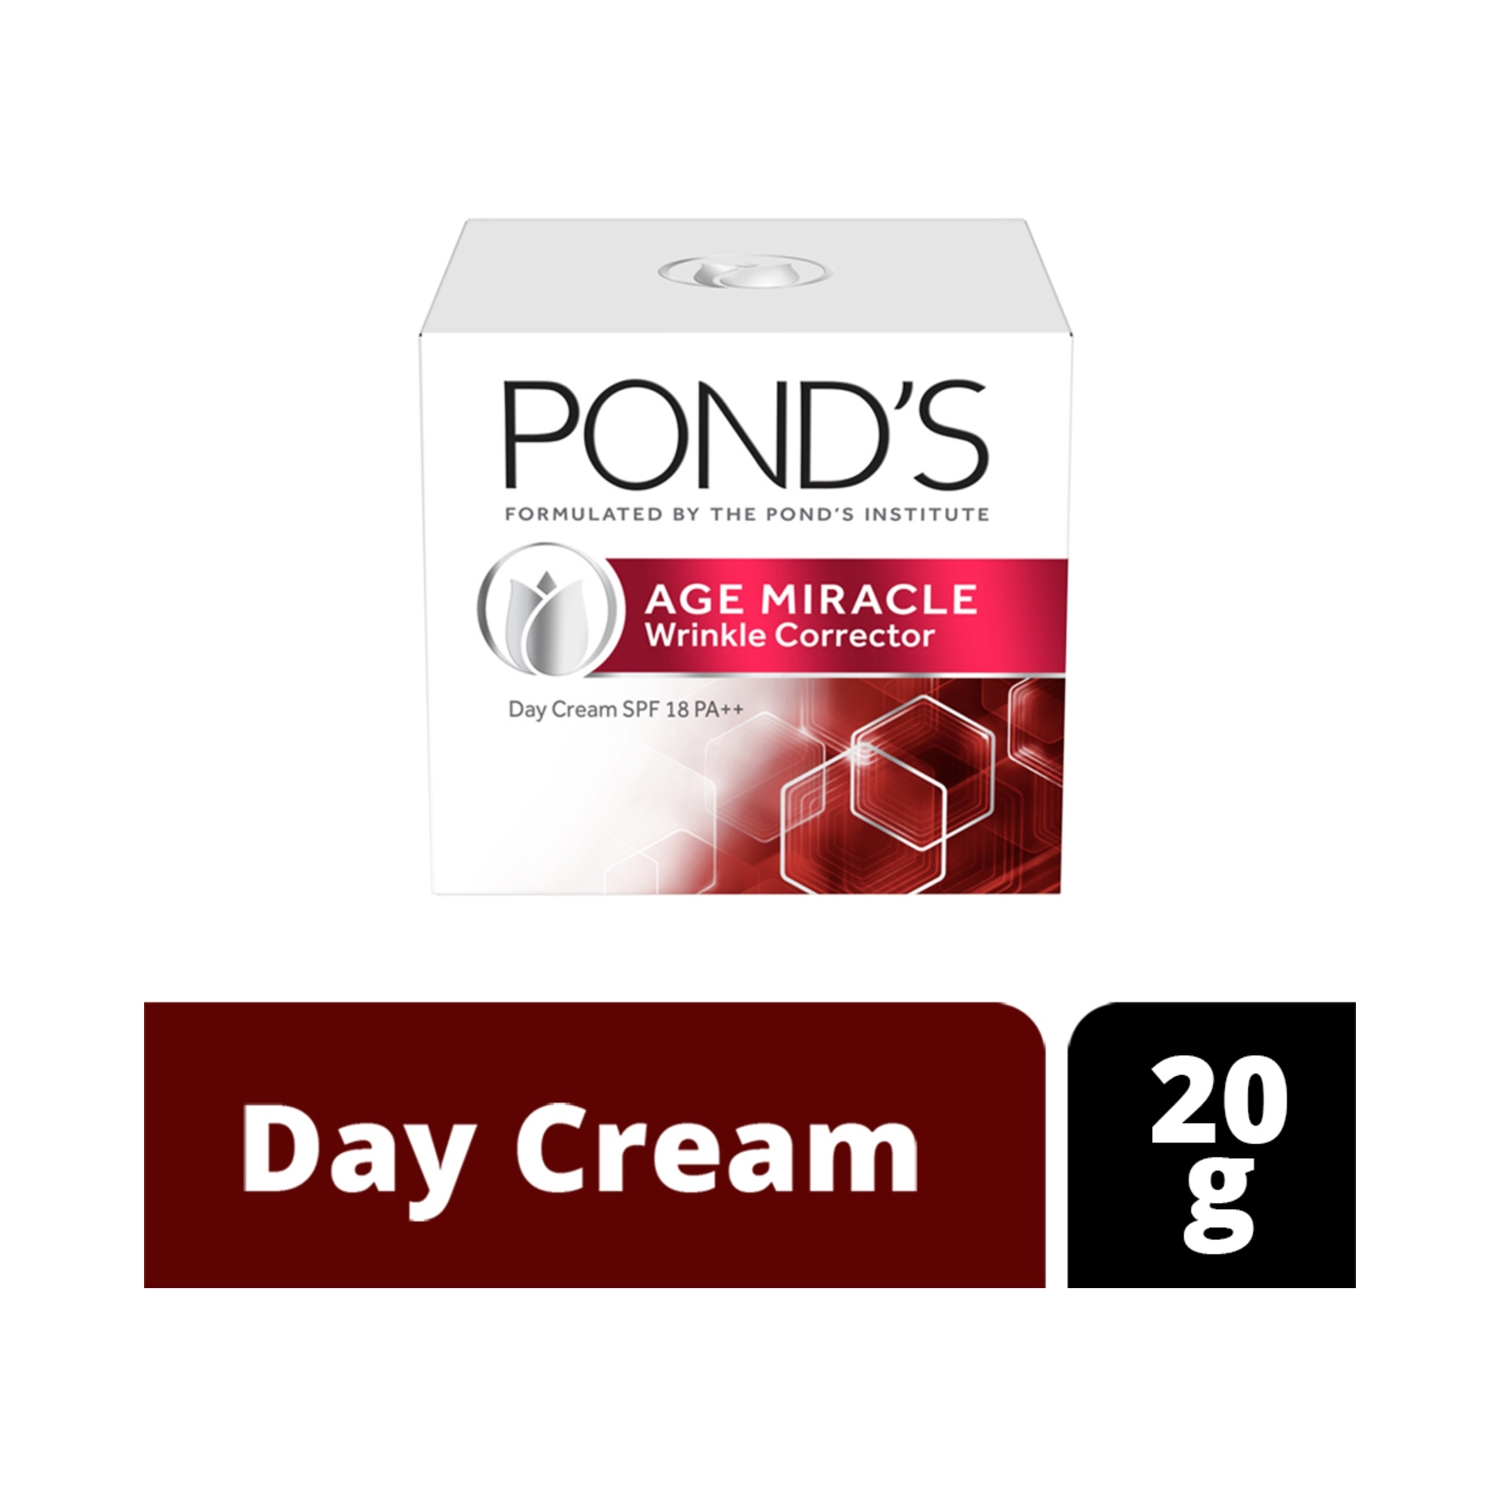 Pond's | Pond's Age Miracle Youthful Glow Day Cream SPF 15 PA++ (20g)